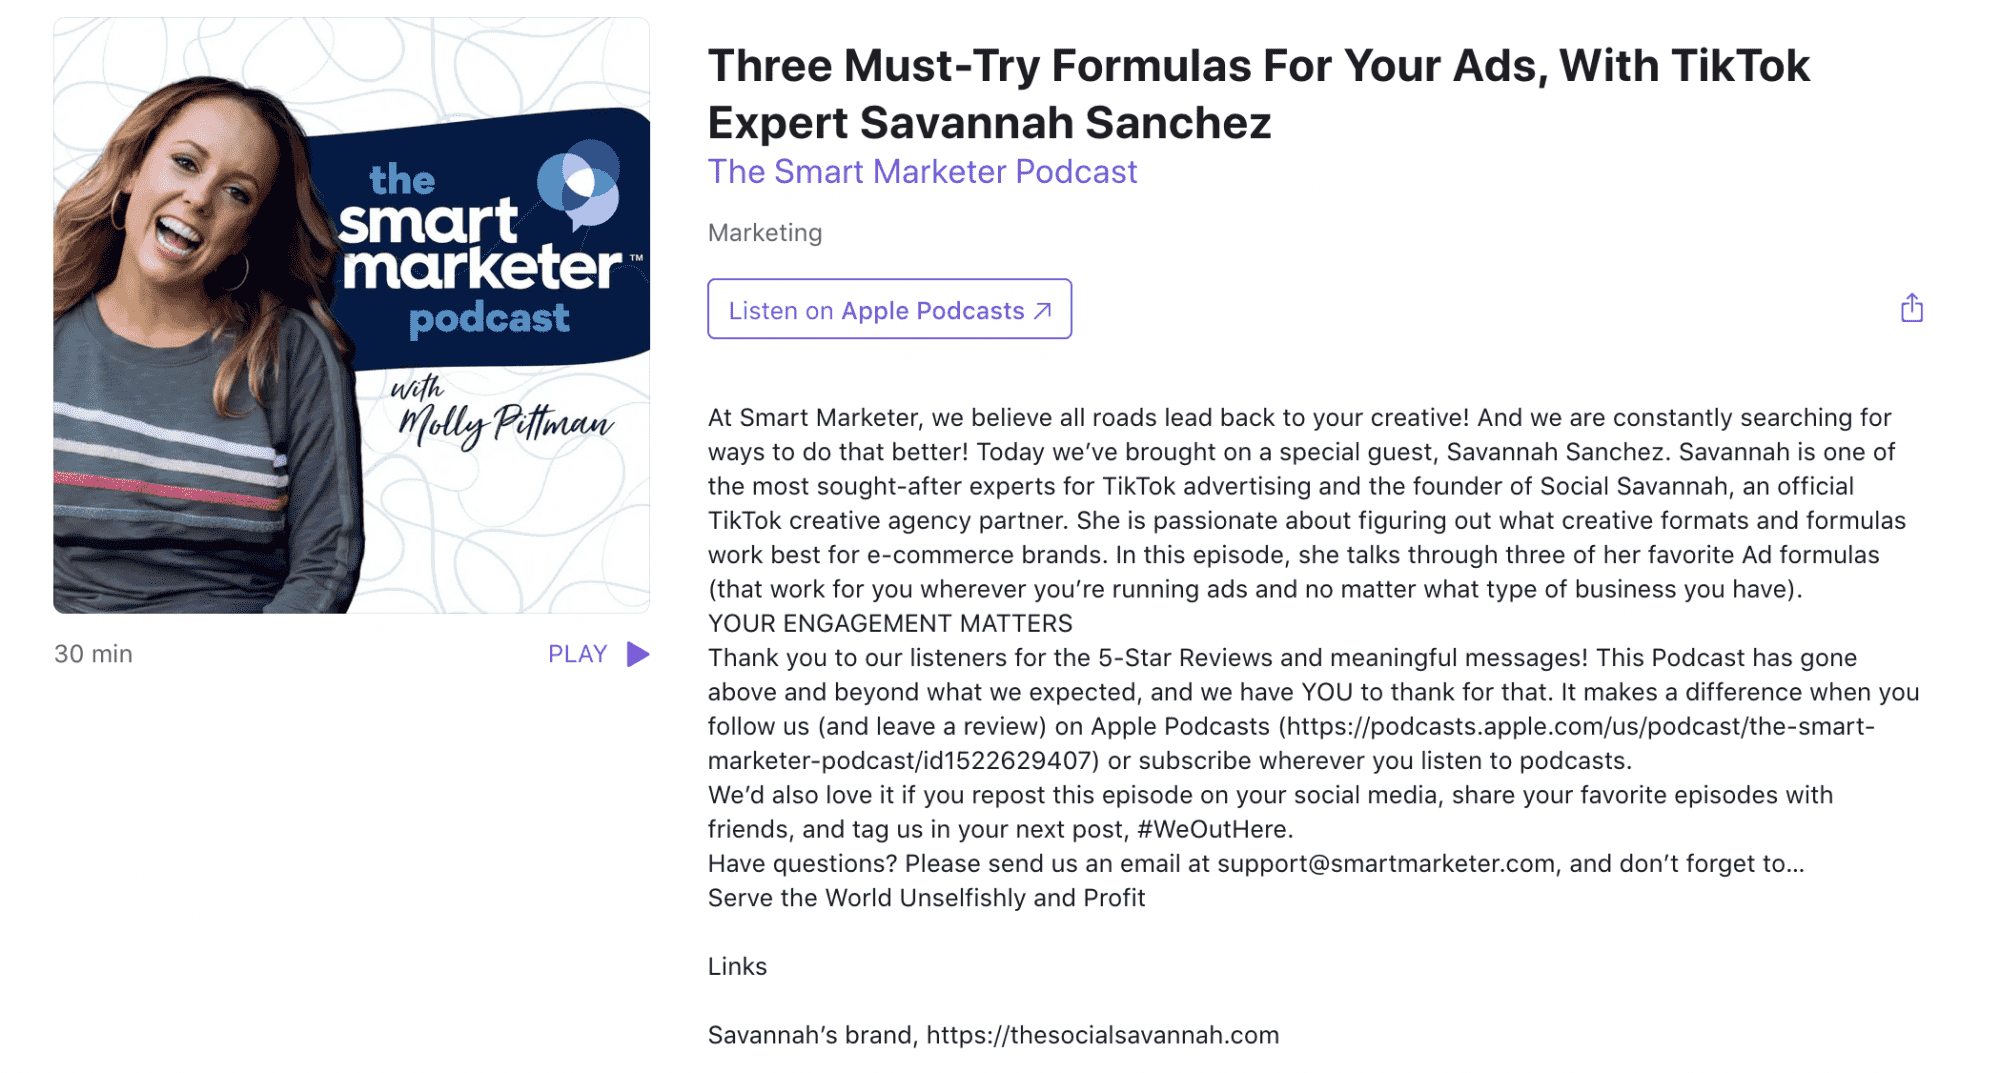 Ep. 134, Three Must-Try Formulas For Your Ads, With TikTok Expert Savannah Sanchez